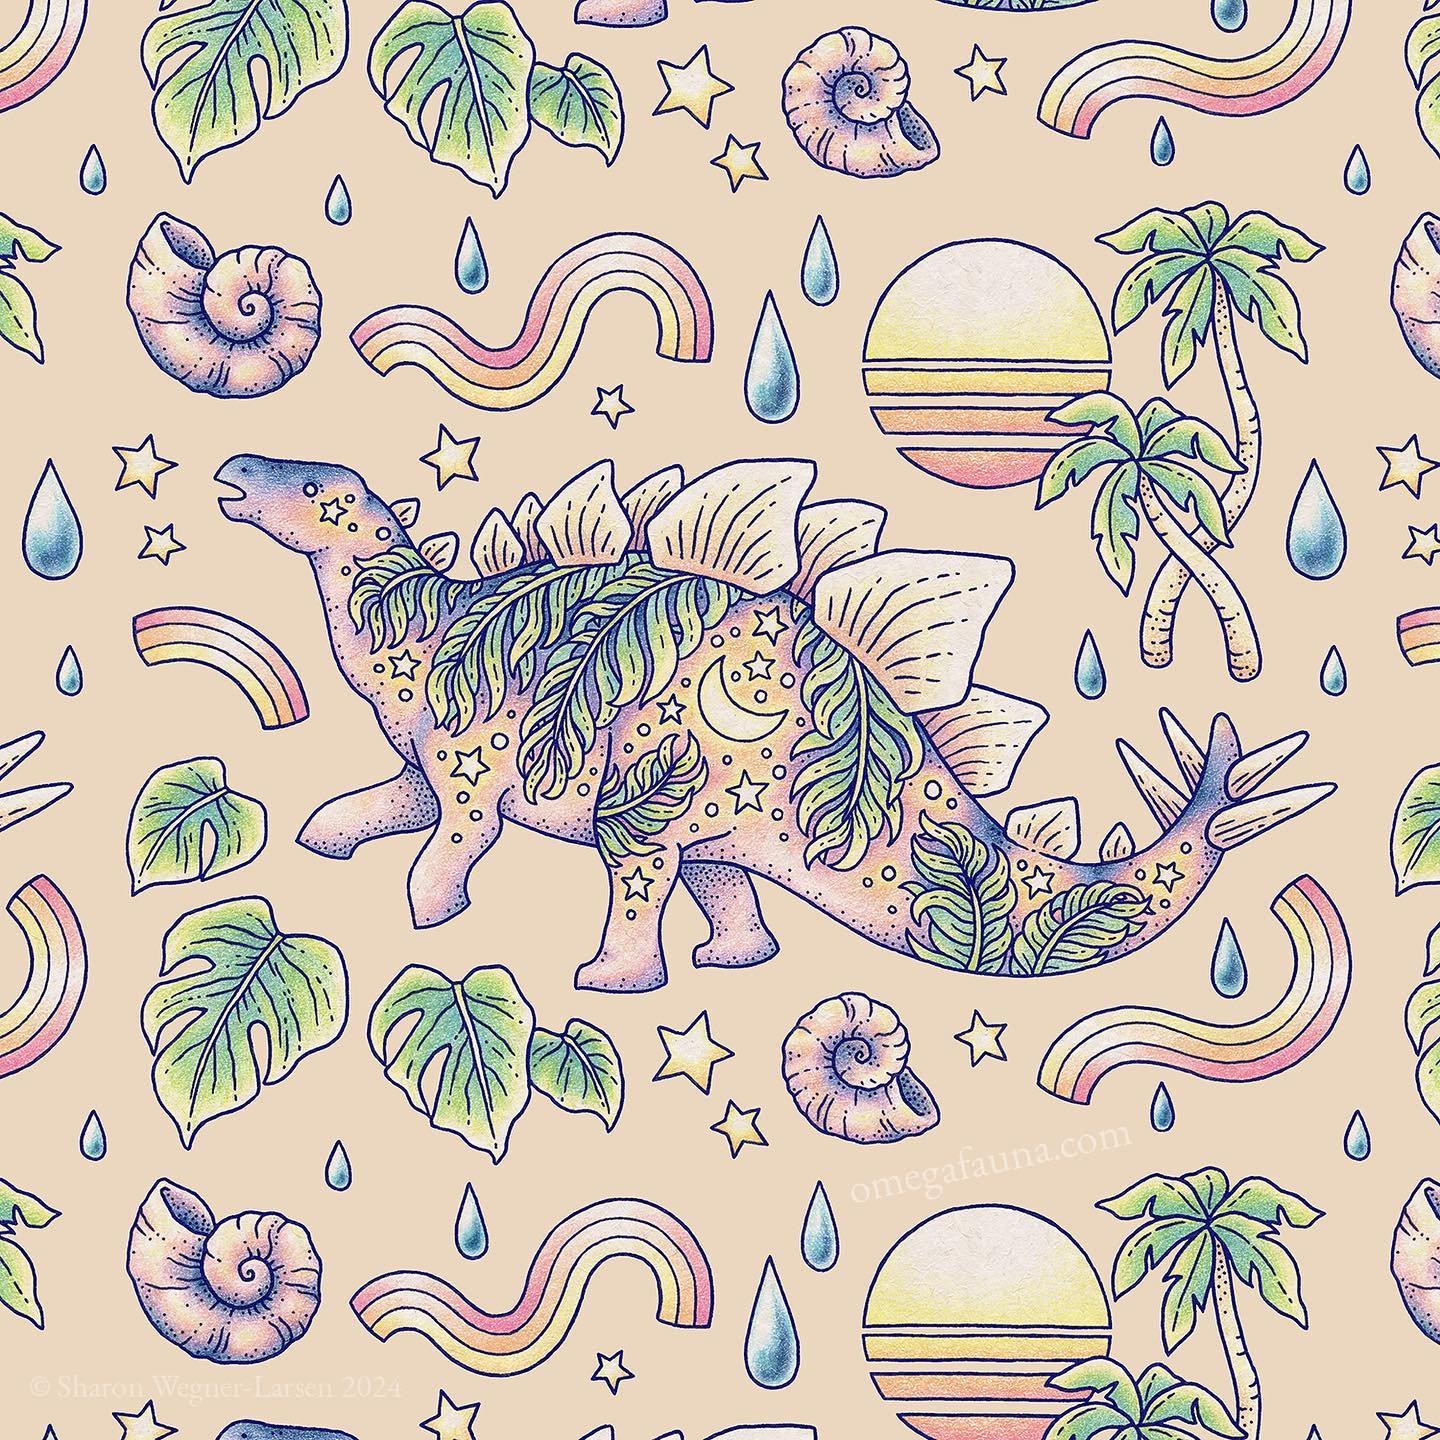 🌴 &ldquo;Jurassic Days, Jurassic Nights: Stegosaurus&rdquo; 🌴 Ink on paper &amp; colored pencil | 2024
.
I created this illustration as a coloring page for my Patrons first, then worked on adapting it to both a cut-out wall hanging shape &amp; a pa